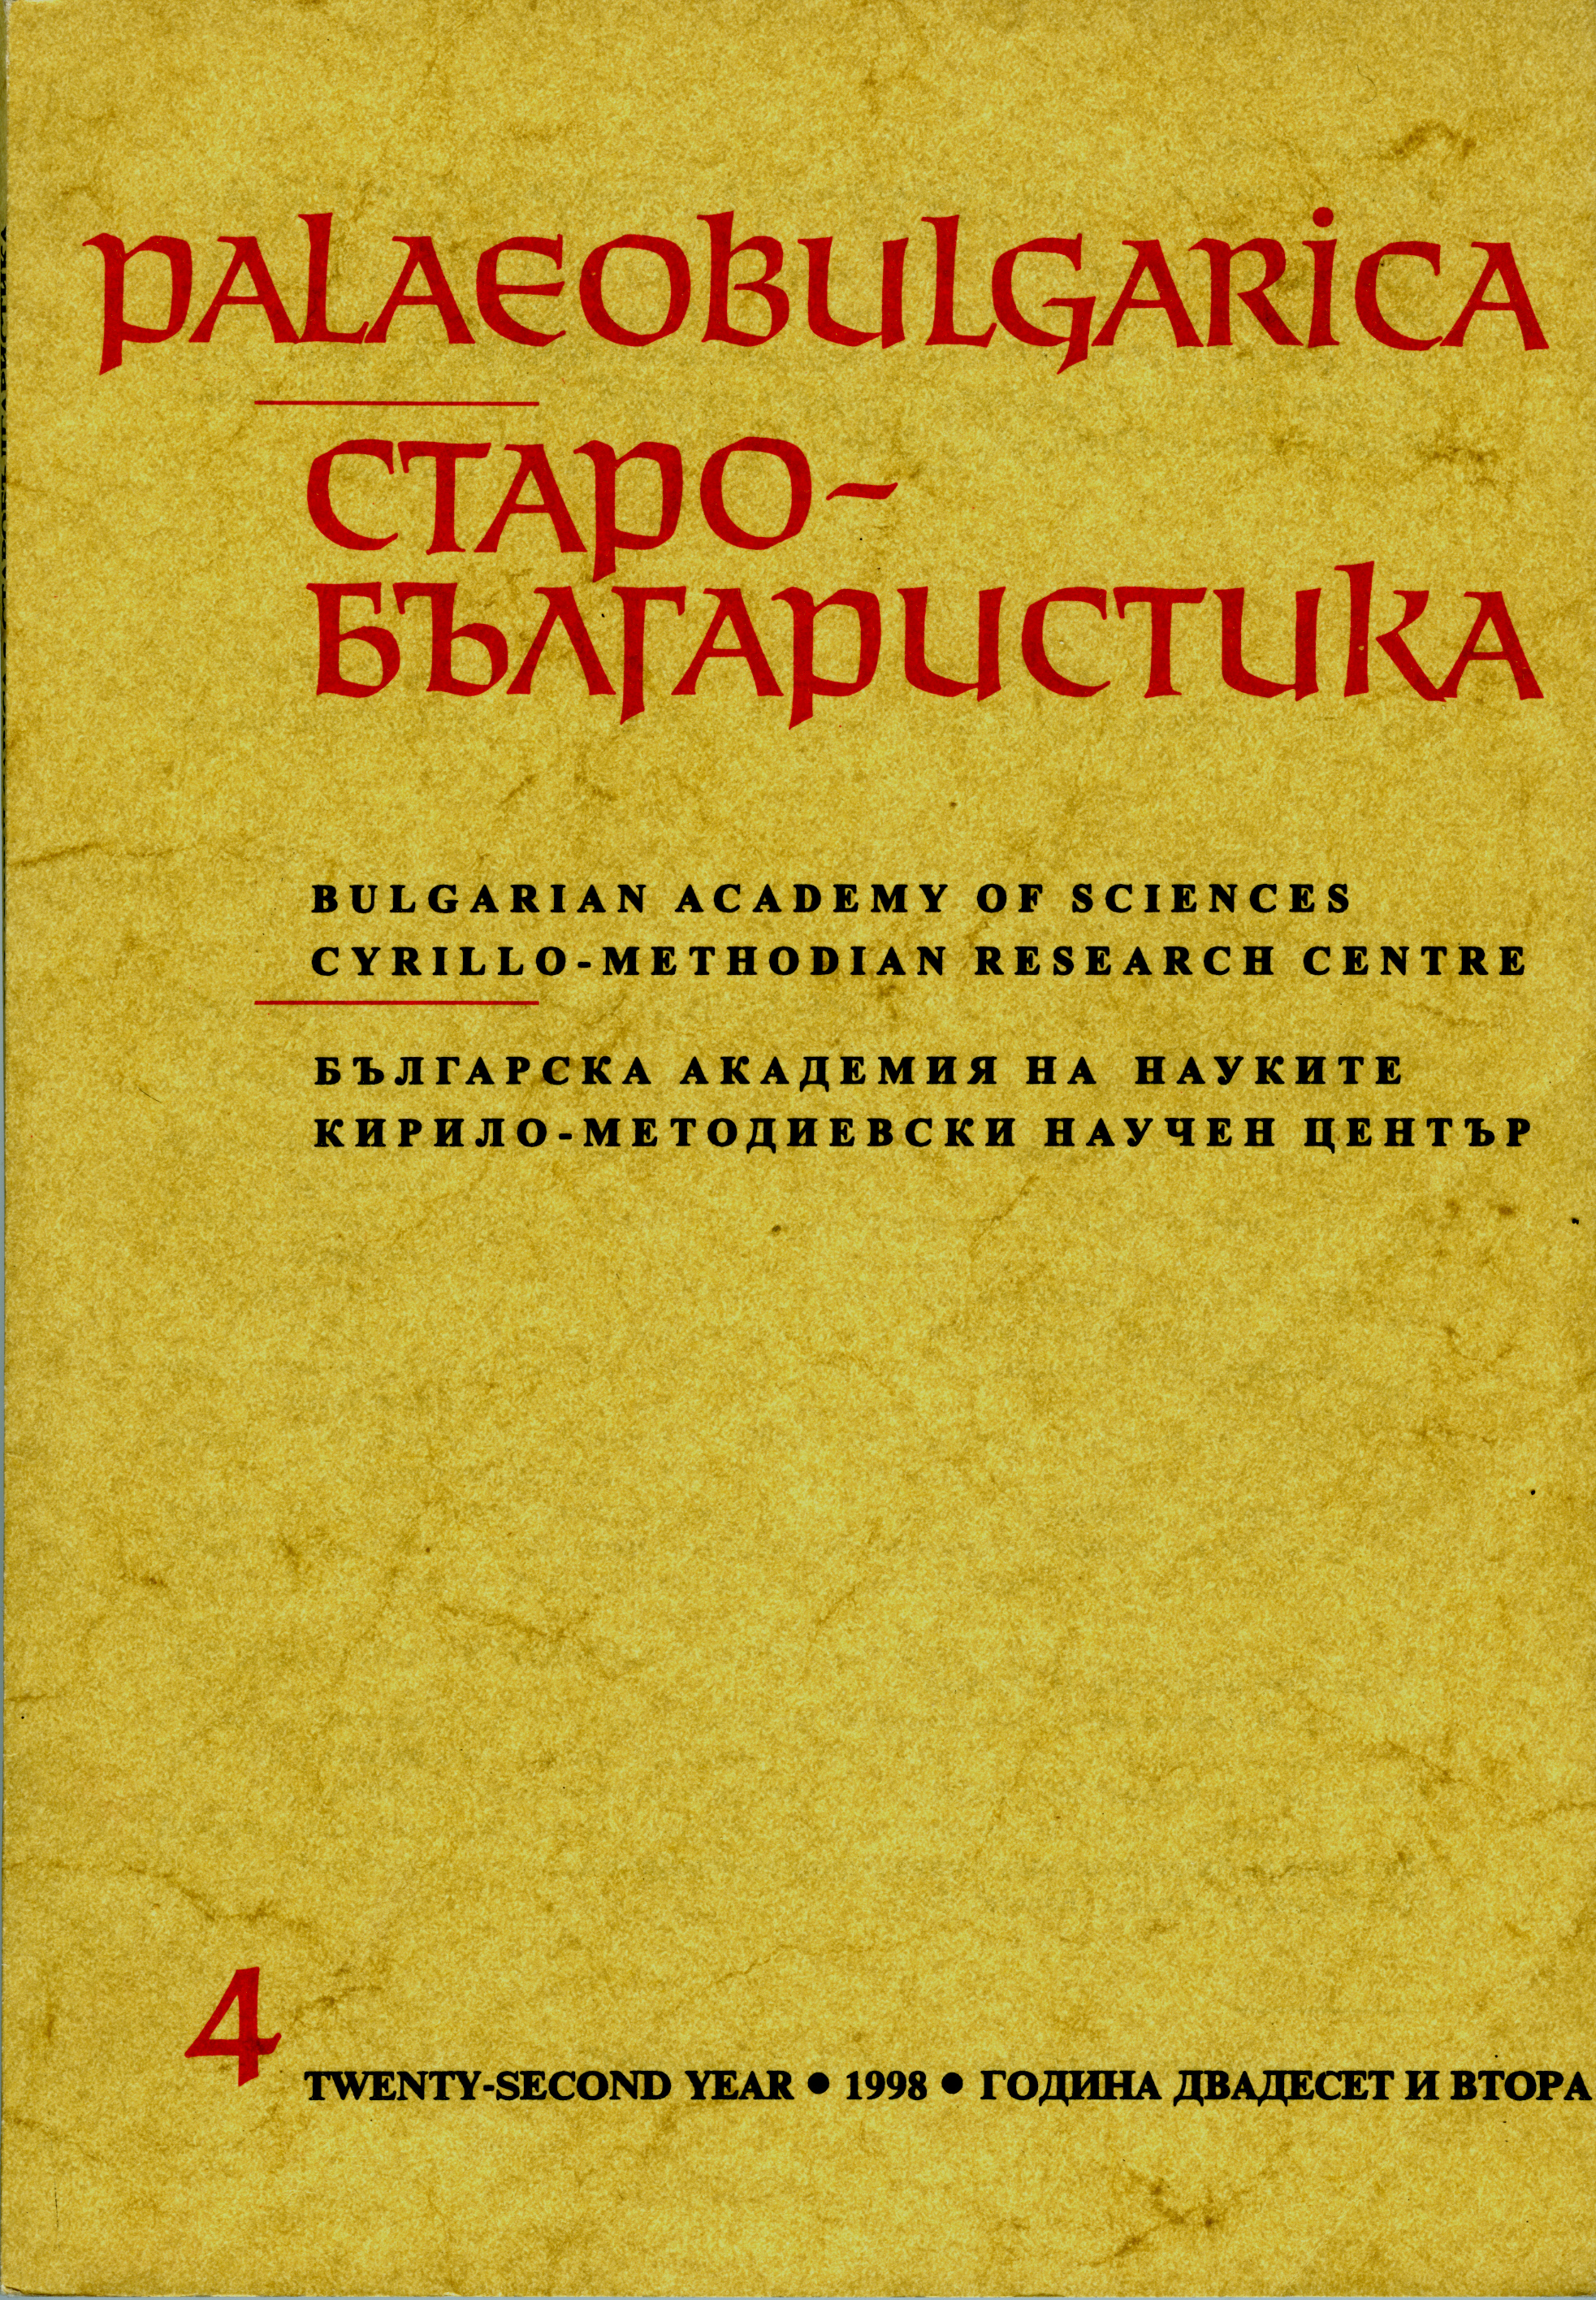 Contact Synonyms in Works of Peter Bogdan Bakscich, Philip Stanislavov and Krastio Peikich Cover Image